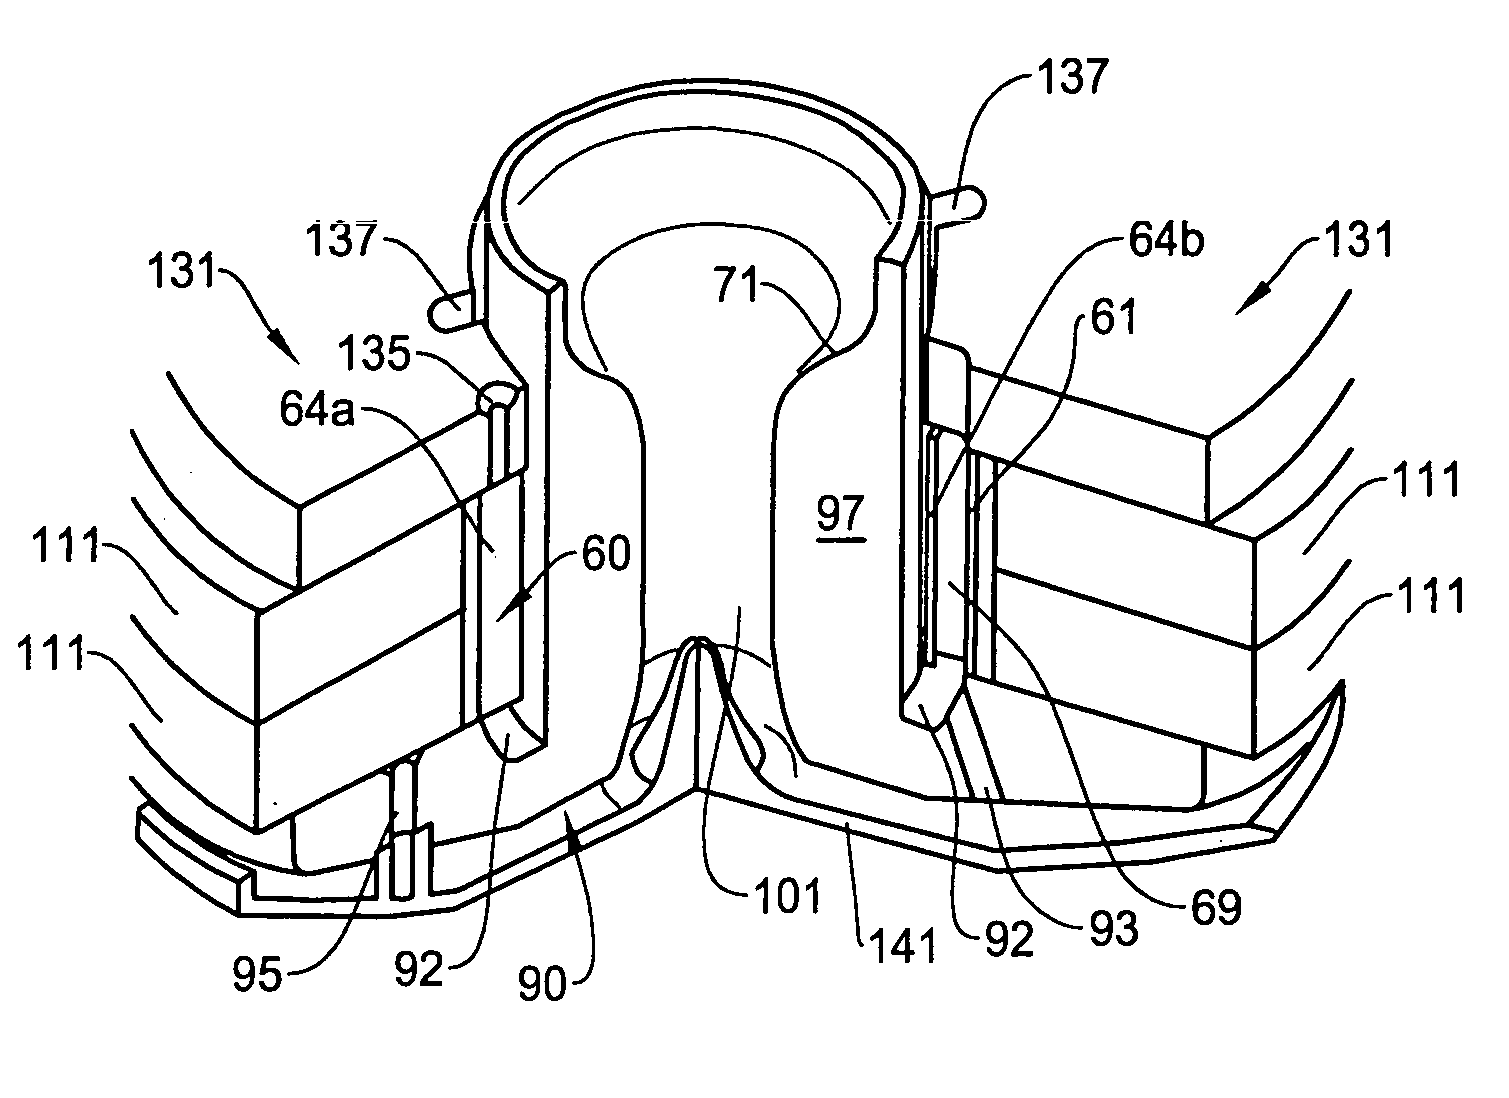 Thermal management system for loudspeaker having internal heat sink and vented top plate